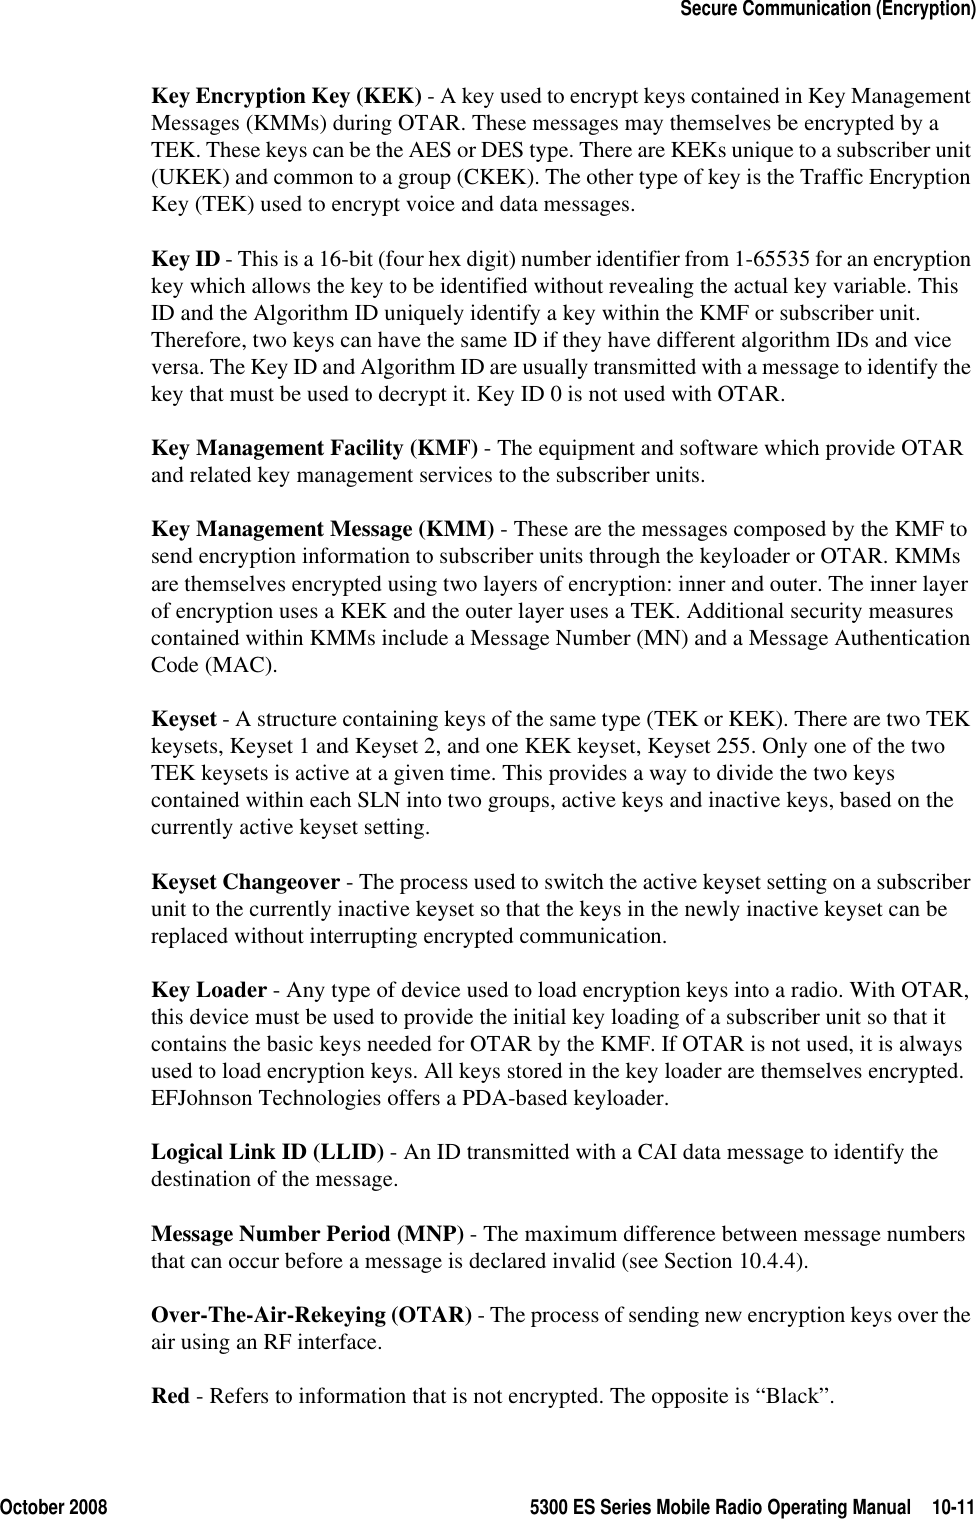 October 2008 5300 ES Series Mobile Radio Operating Manual 10-11Secure Communication (Encryption)Key Encryption Key (KEK) - A key used to encrypt keys contained in Key Management Messages (KMMs) during OTAR. These messages may themselves be encrypted by a TEK. These keys can be the AES or DES type. There are KEKs unique to a subscriber unit (UKEK) and common to a group (CKEK). The other type of key is the Traffic Encryption Key (TEK) used to encrypt voice and data messages.Key ID - This is a 16-bit (four hex digit) number identifier from 1-65535 for an encryption key which allows the key to be identified without revealing the actual key variable. This ID and the Algorithm ID uniquely identify a key within the KMF or subscriber unit. Therefore, two keys can have the same ID if they have different algorithm IDs and vice versa. The Key ID and Algorithm ID are usually transmitted with a message to identify the key that must be used to decrypt it. Key ID 0 is not used with OTAR.Key Management Facility (KMF) - The equipment and software which provide OTAR and related key management services to the subscriber units.Key Management Message (KMM) - These are the messages composed by the KMF to send encryption information to subscriber units through the keyloader or OTAR. KMMs are themselves encrypted using two layers of encryption: inner and outer. The inner layer of encryption uses a KEK and the outer layer uses a TEK. Additional security measures contained within KMMs include a Message Number (MN) and a Message Authentication Code (MAC).Keyset - A structure containing keys of the same type (TEK or KEK). There are two TEK keysets, Keyset 1 and Keyset 2, and one KEK keyset, Keyset 255. Only one of the two TEK keysets is active at a given time. This provides a way to divide the two keys contained within each SLN into two groups, active keys and inactive keys, based on the currently active keyset setting.Keyset Changeover - The process used to switch the active keyset setting on a subscriber unit to the currently inactive keyset so that the keys in the newly inactive keyset can be replaced without interrupting encrypted communication.Key Loader - Any type of device used to load encryption keys into a radio. With OTAR, this device must be used to provide the initial key loading of a subscriber unit so that it contains the basic keys needed for OTAR by the KMF. If OTAR is not used, it is always used to load encryption keys. All keys stored in the key loader are themselves encrypted. EFJohnson Technologies offers a PDA-based keyloader.Logical Link ID (LLID) - An ID transmitted with a CAI data message to identify the destination of the message. Message Number Period (MNP) - The maximum difference between message numbers that can occur before a message is declared invalid (see Section 10.4.4).Over-The-Air-Rekeying (OTAR) - The process of sending new encryption keys over the air using an RF interface.Red - Refers to information that is not encrypted. The opposite is “Black”.